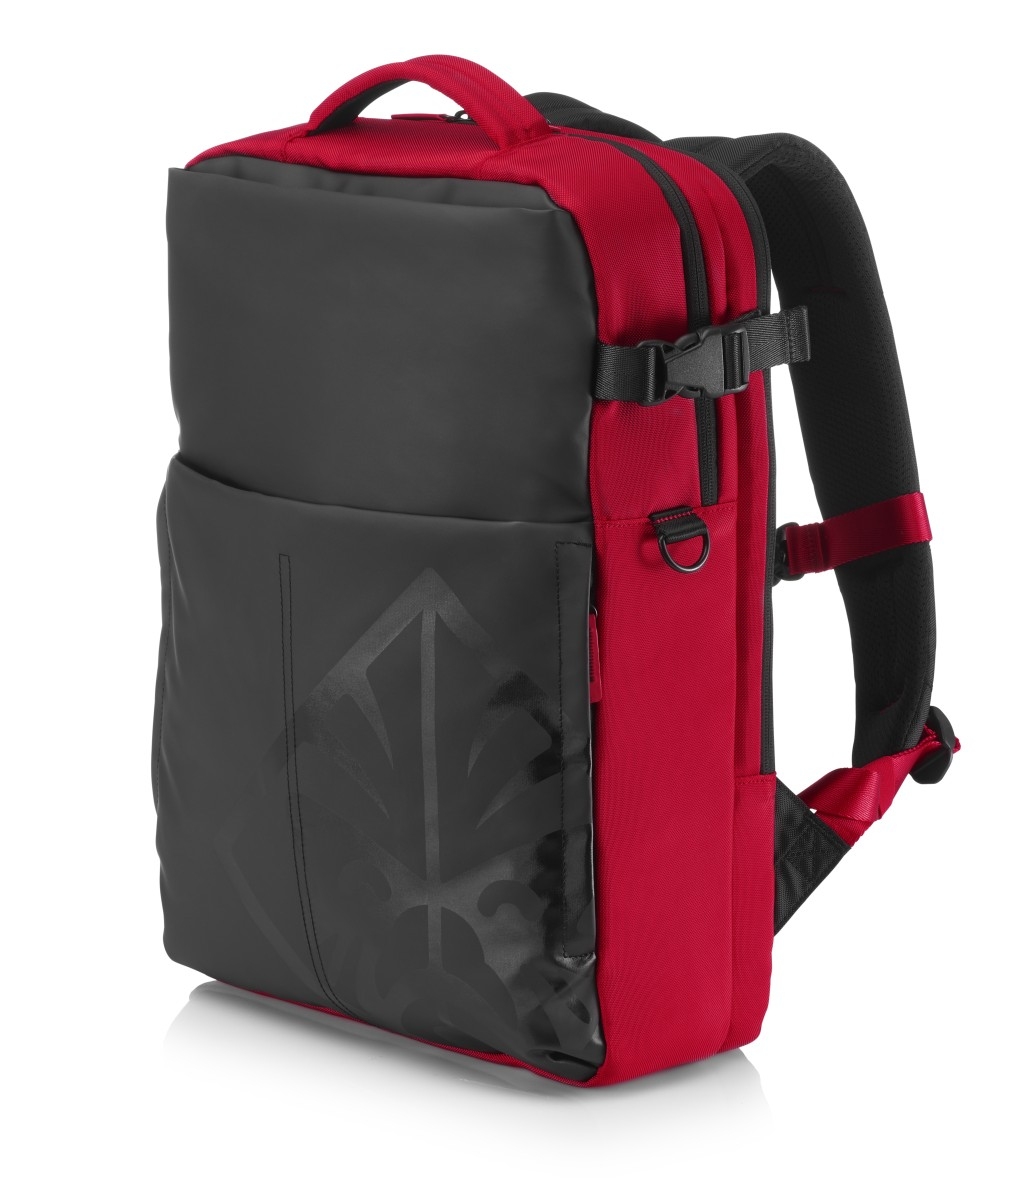 HP OMEN 17.3 Inch Black/Red Gaming Backpack